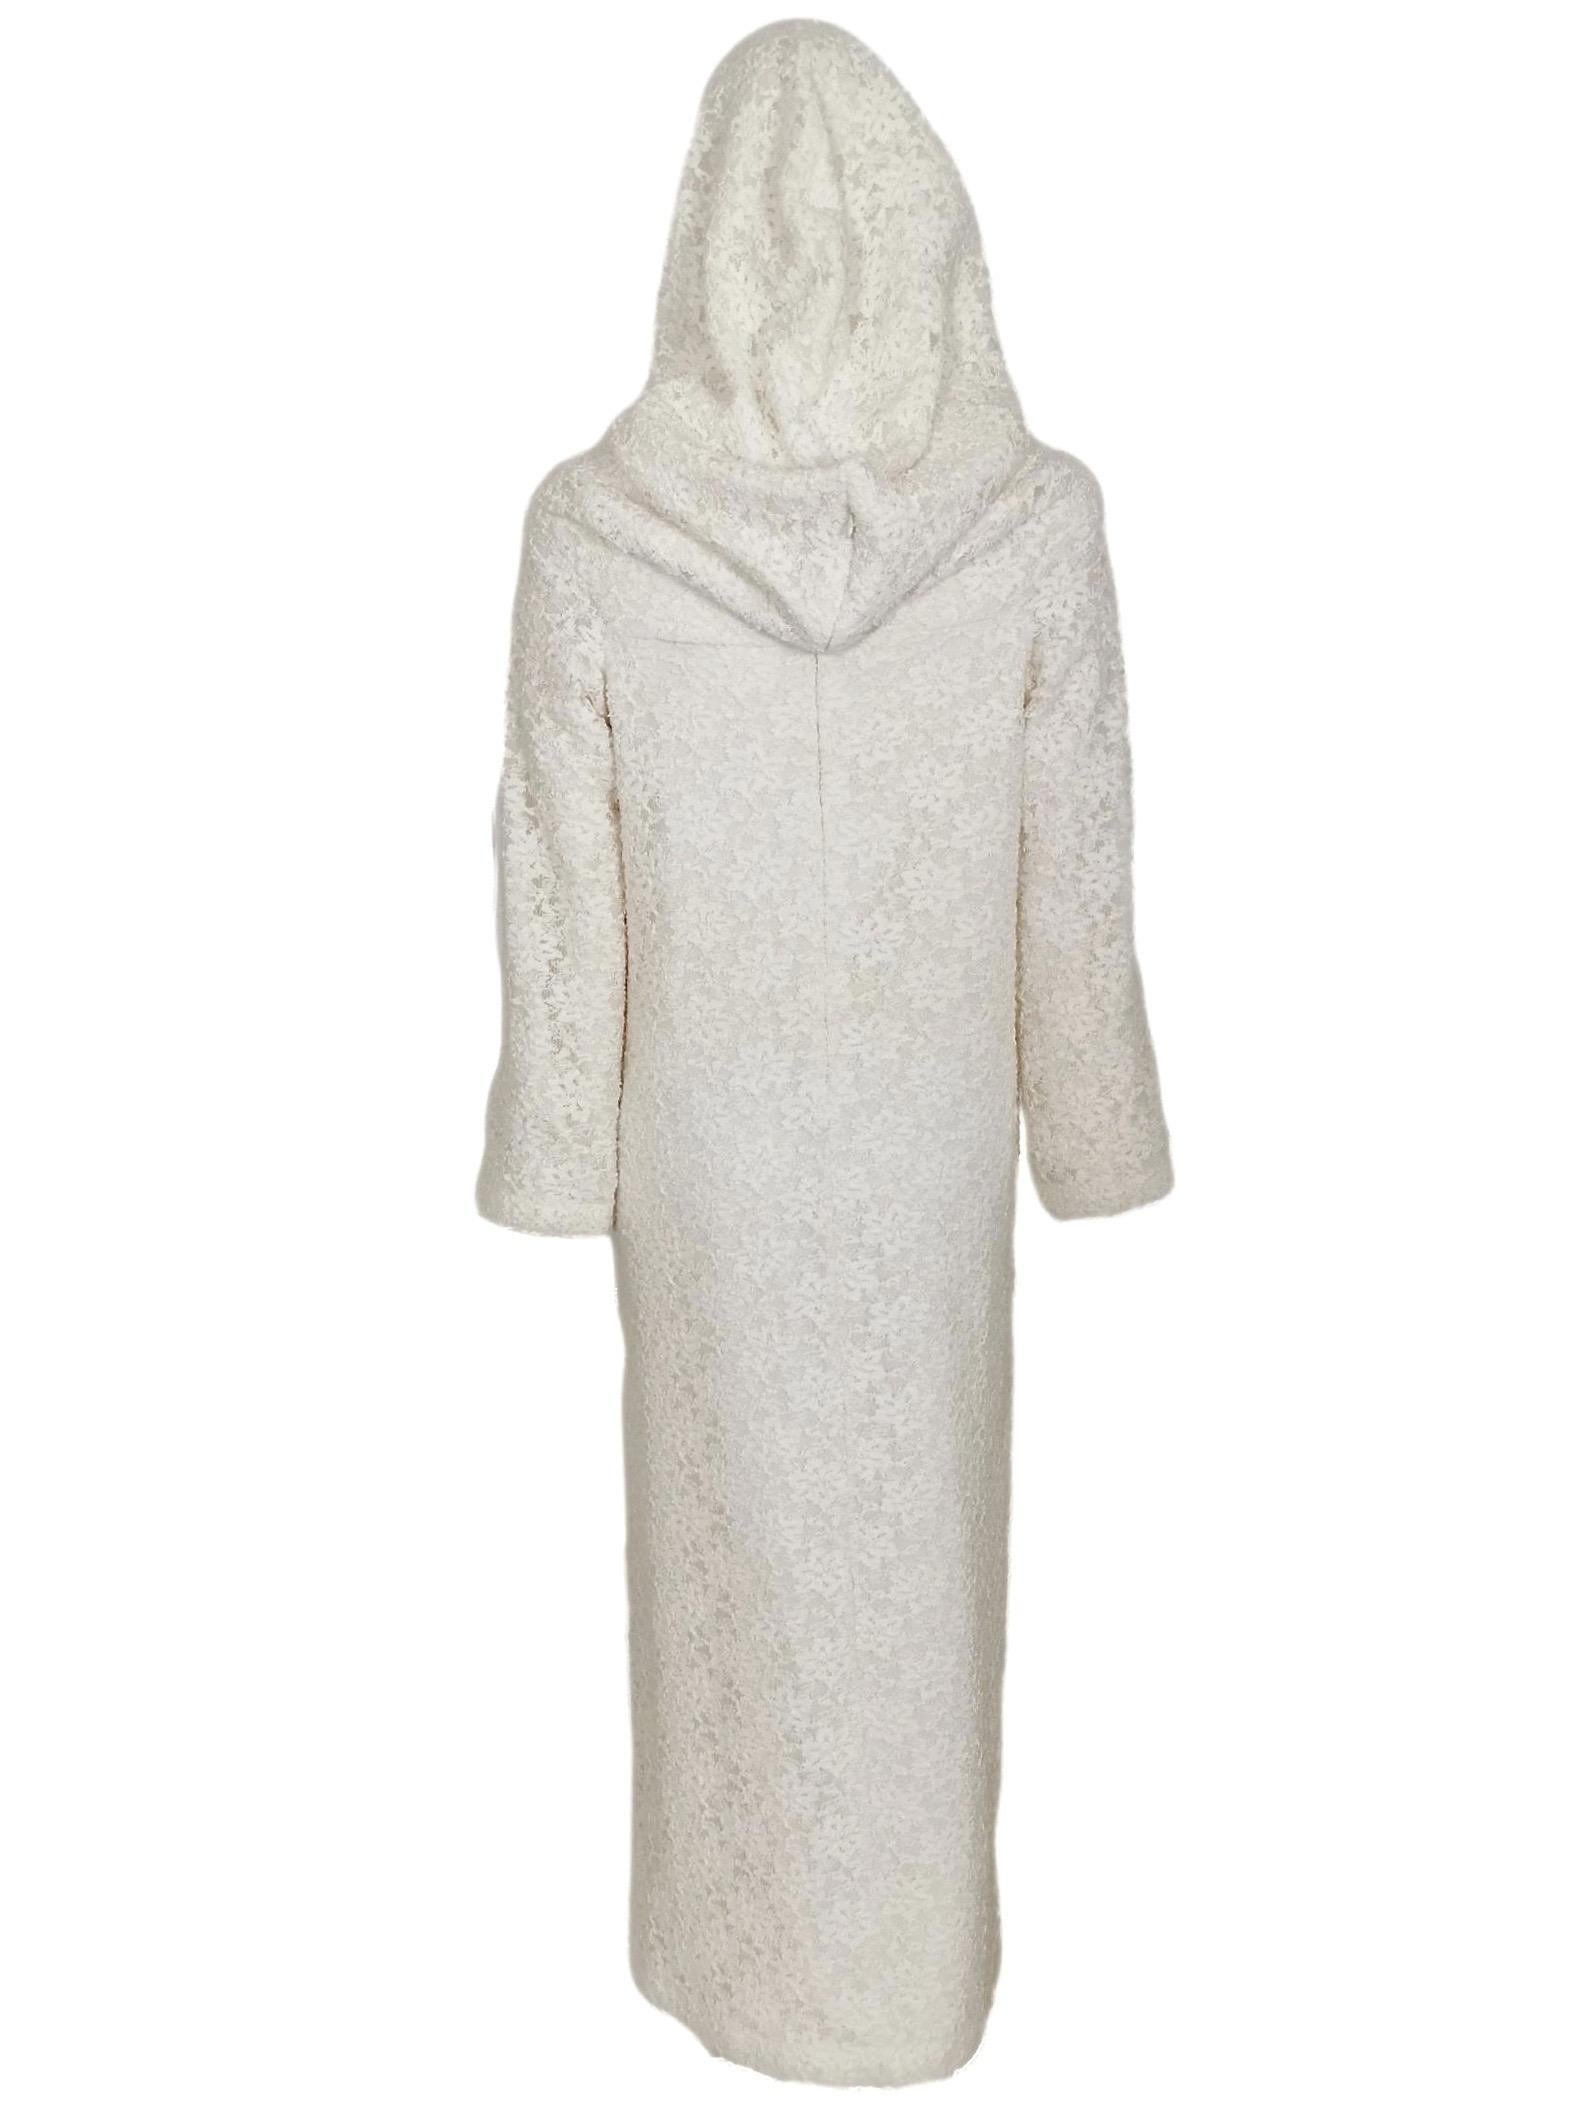 Comme Des Garcons White Drama Cowl Hooded Dress AD 2011 In Good Condition For Sale In Bath, GB